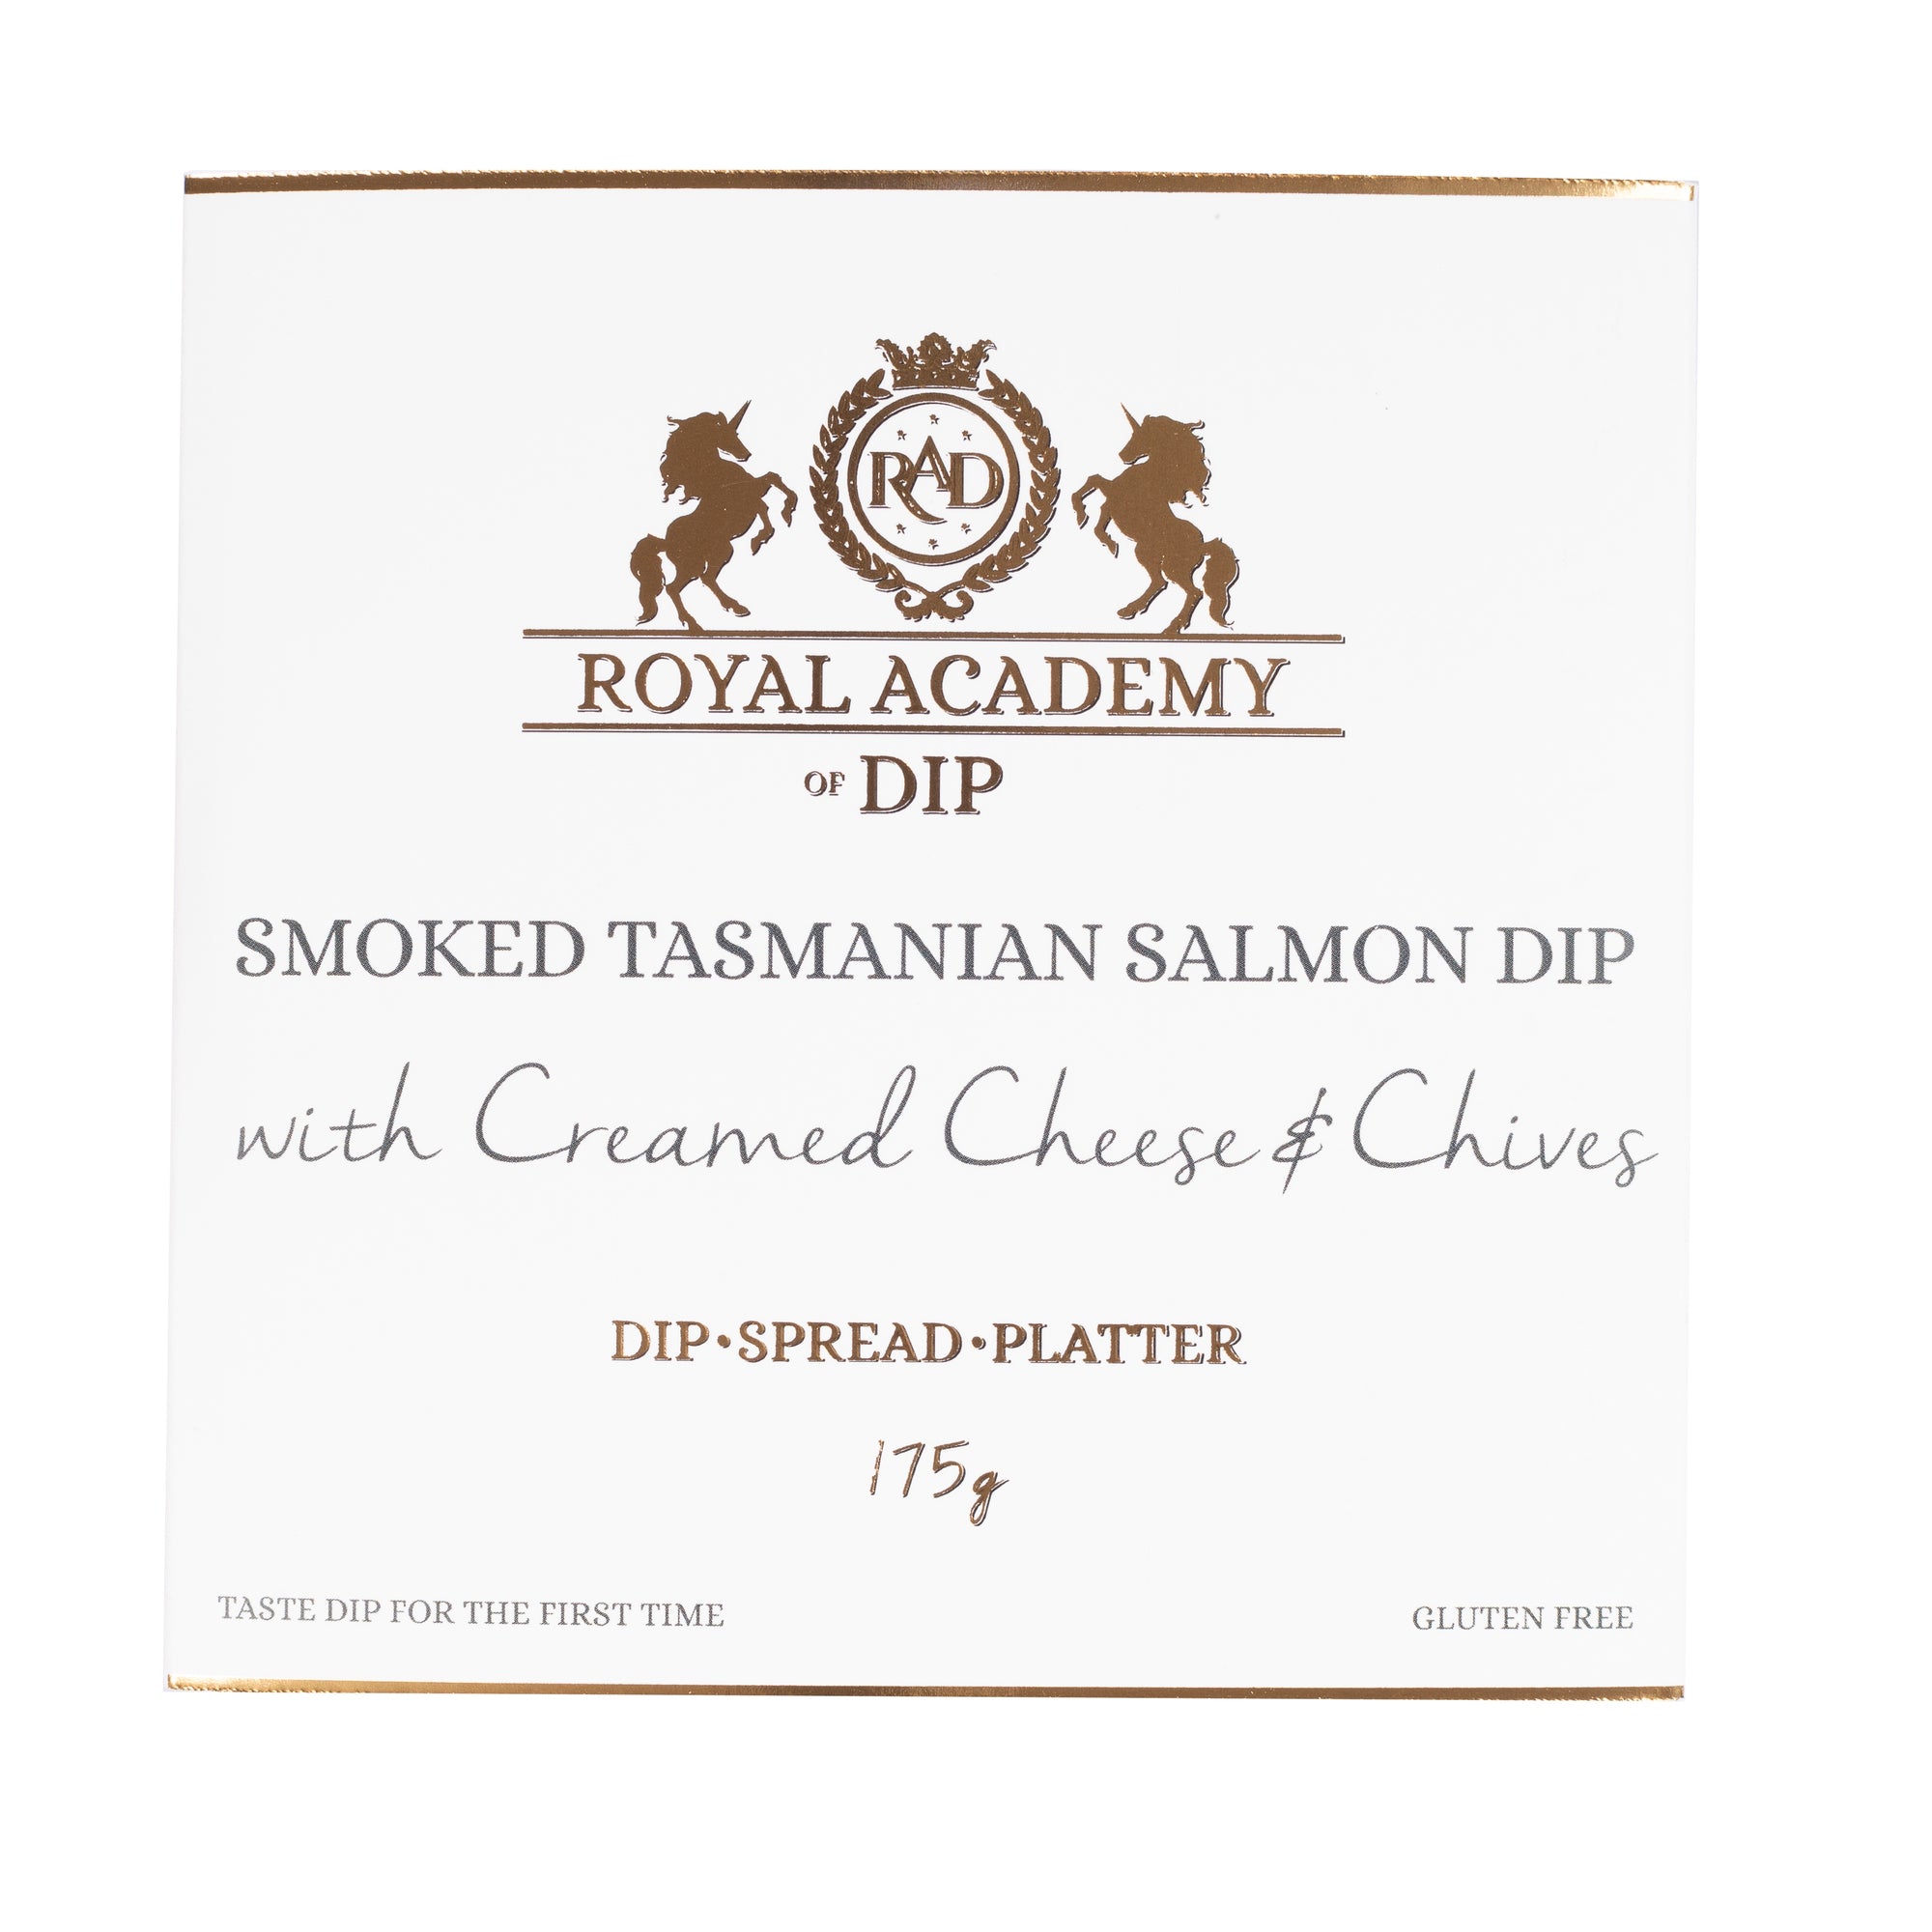 Royal Academy of Dip Smoked Tasmanian Salmon Dip with Creamed Cheese & Chives 175g